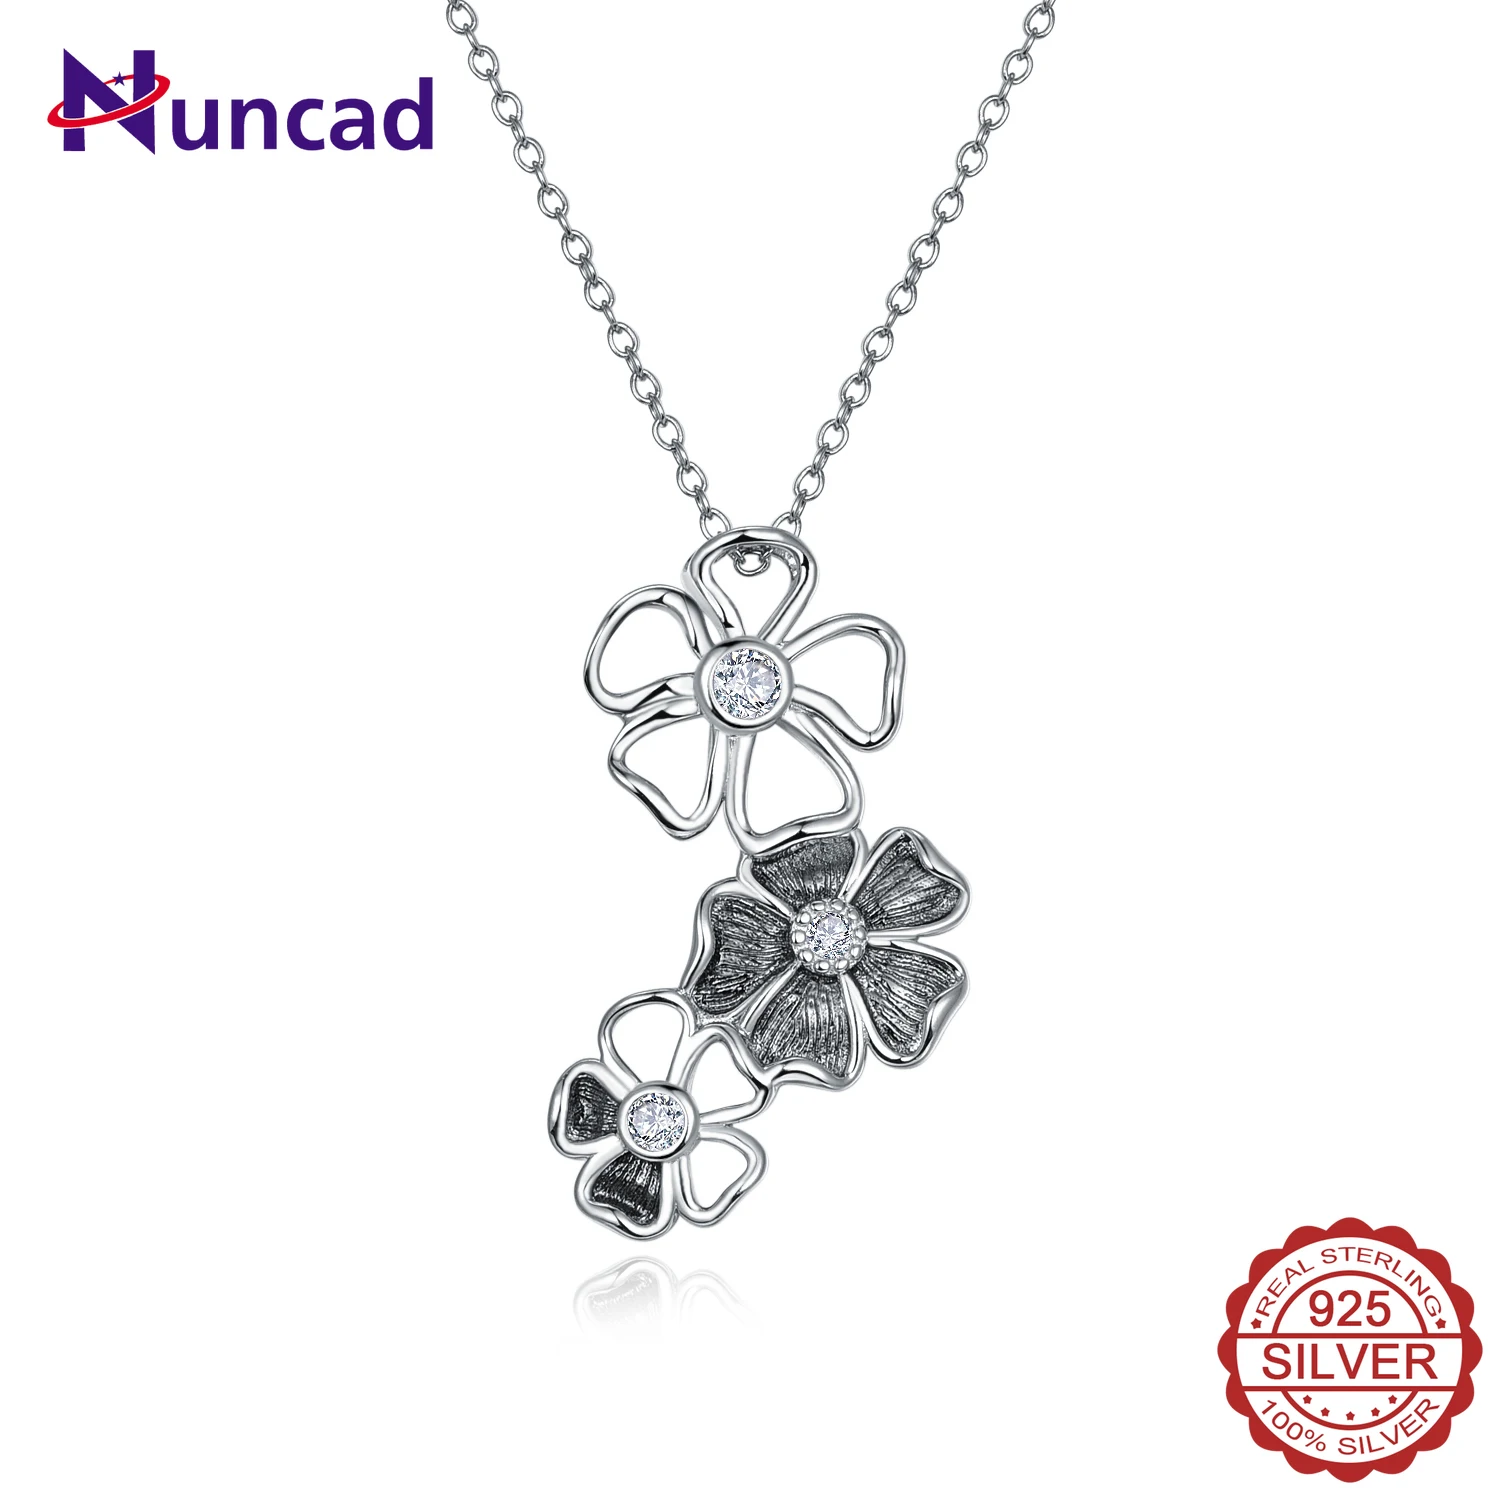 NUNCAD 925 Sterling Silver Pendant Necklace for Women Retro Flower Pattern Plated White Gold Women Wedding Gift Jewelry